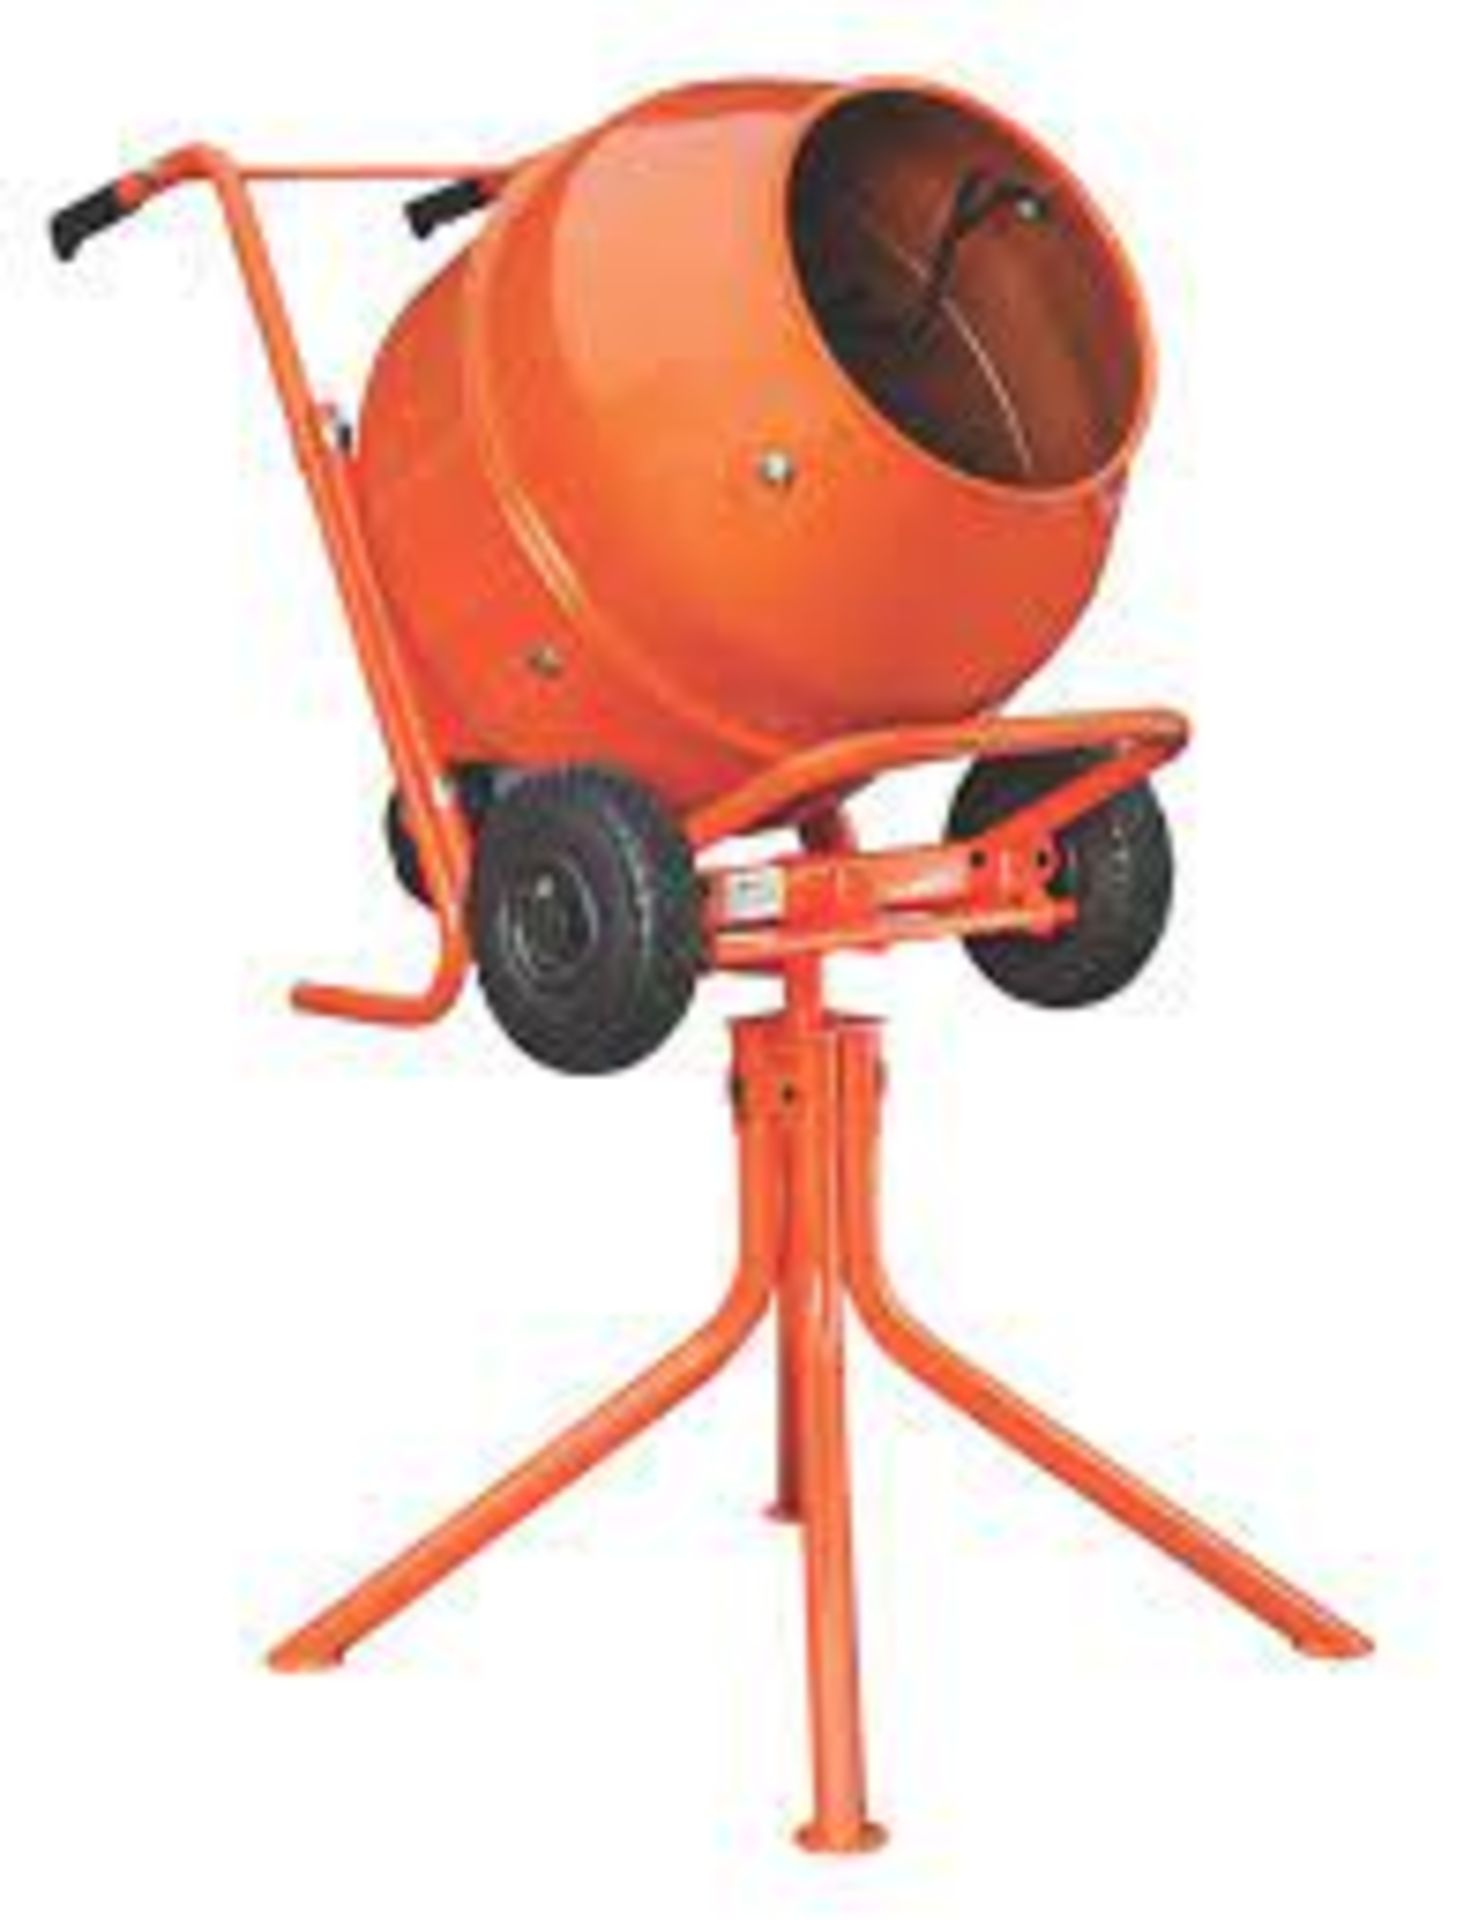 Electric CONCRETE MIXER 230V. - SR6. Upright mixer for small to medium building projects. Light